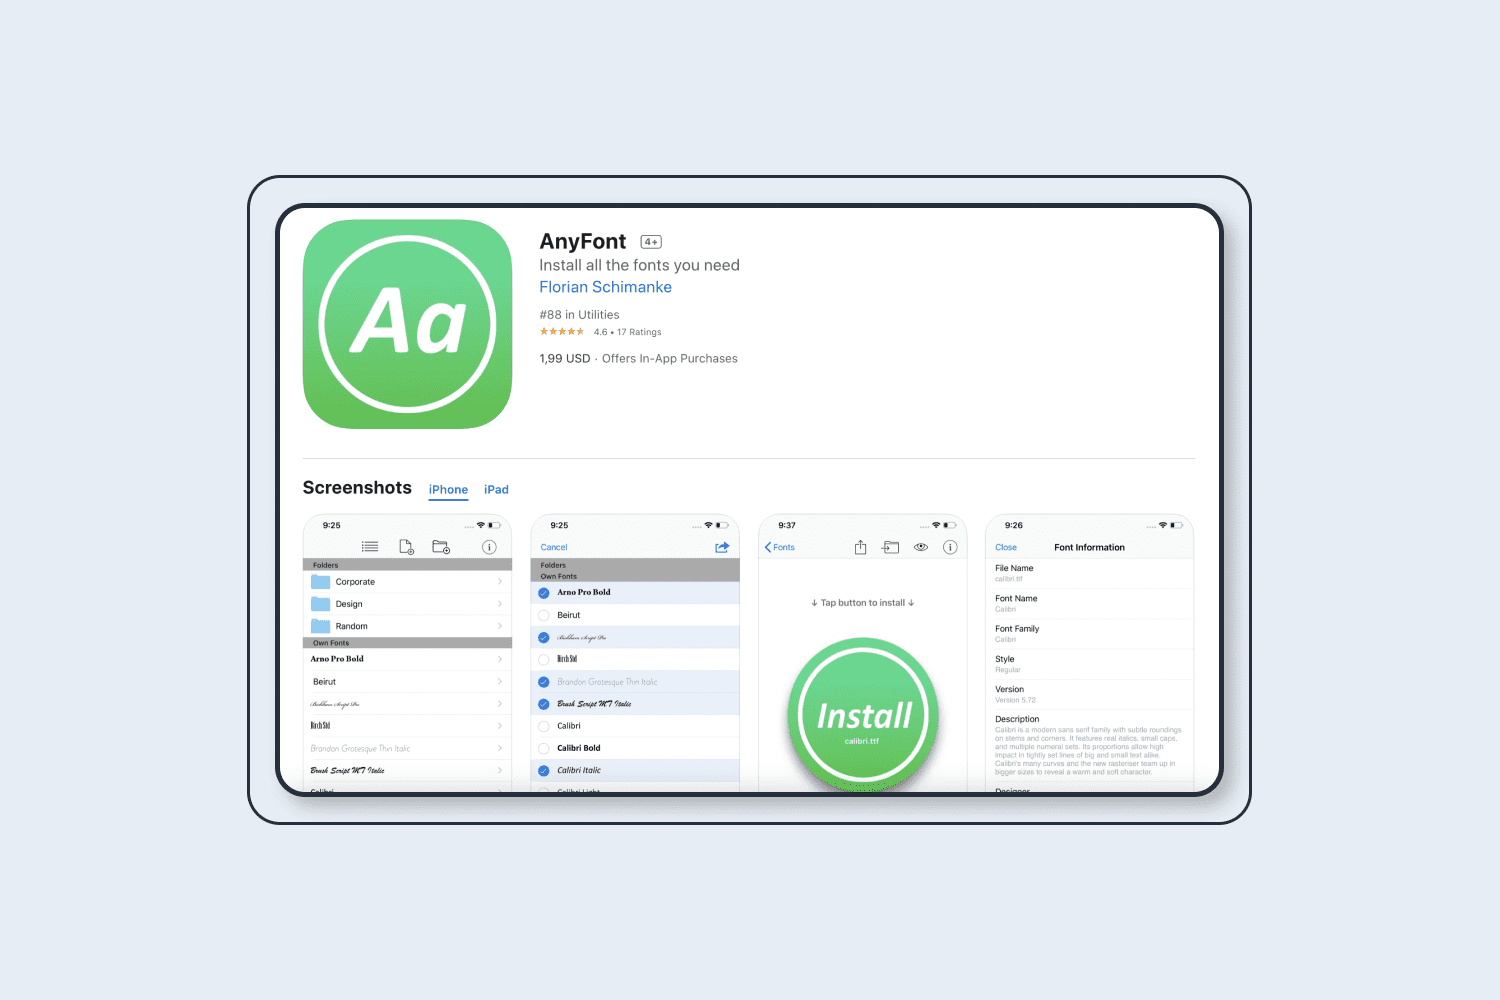 Step 1. To install a new font on our system, we first need to add it to the AnyFont app.